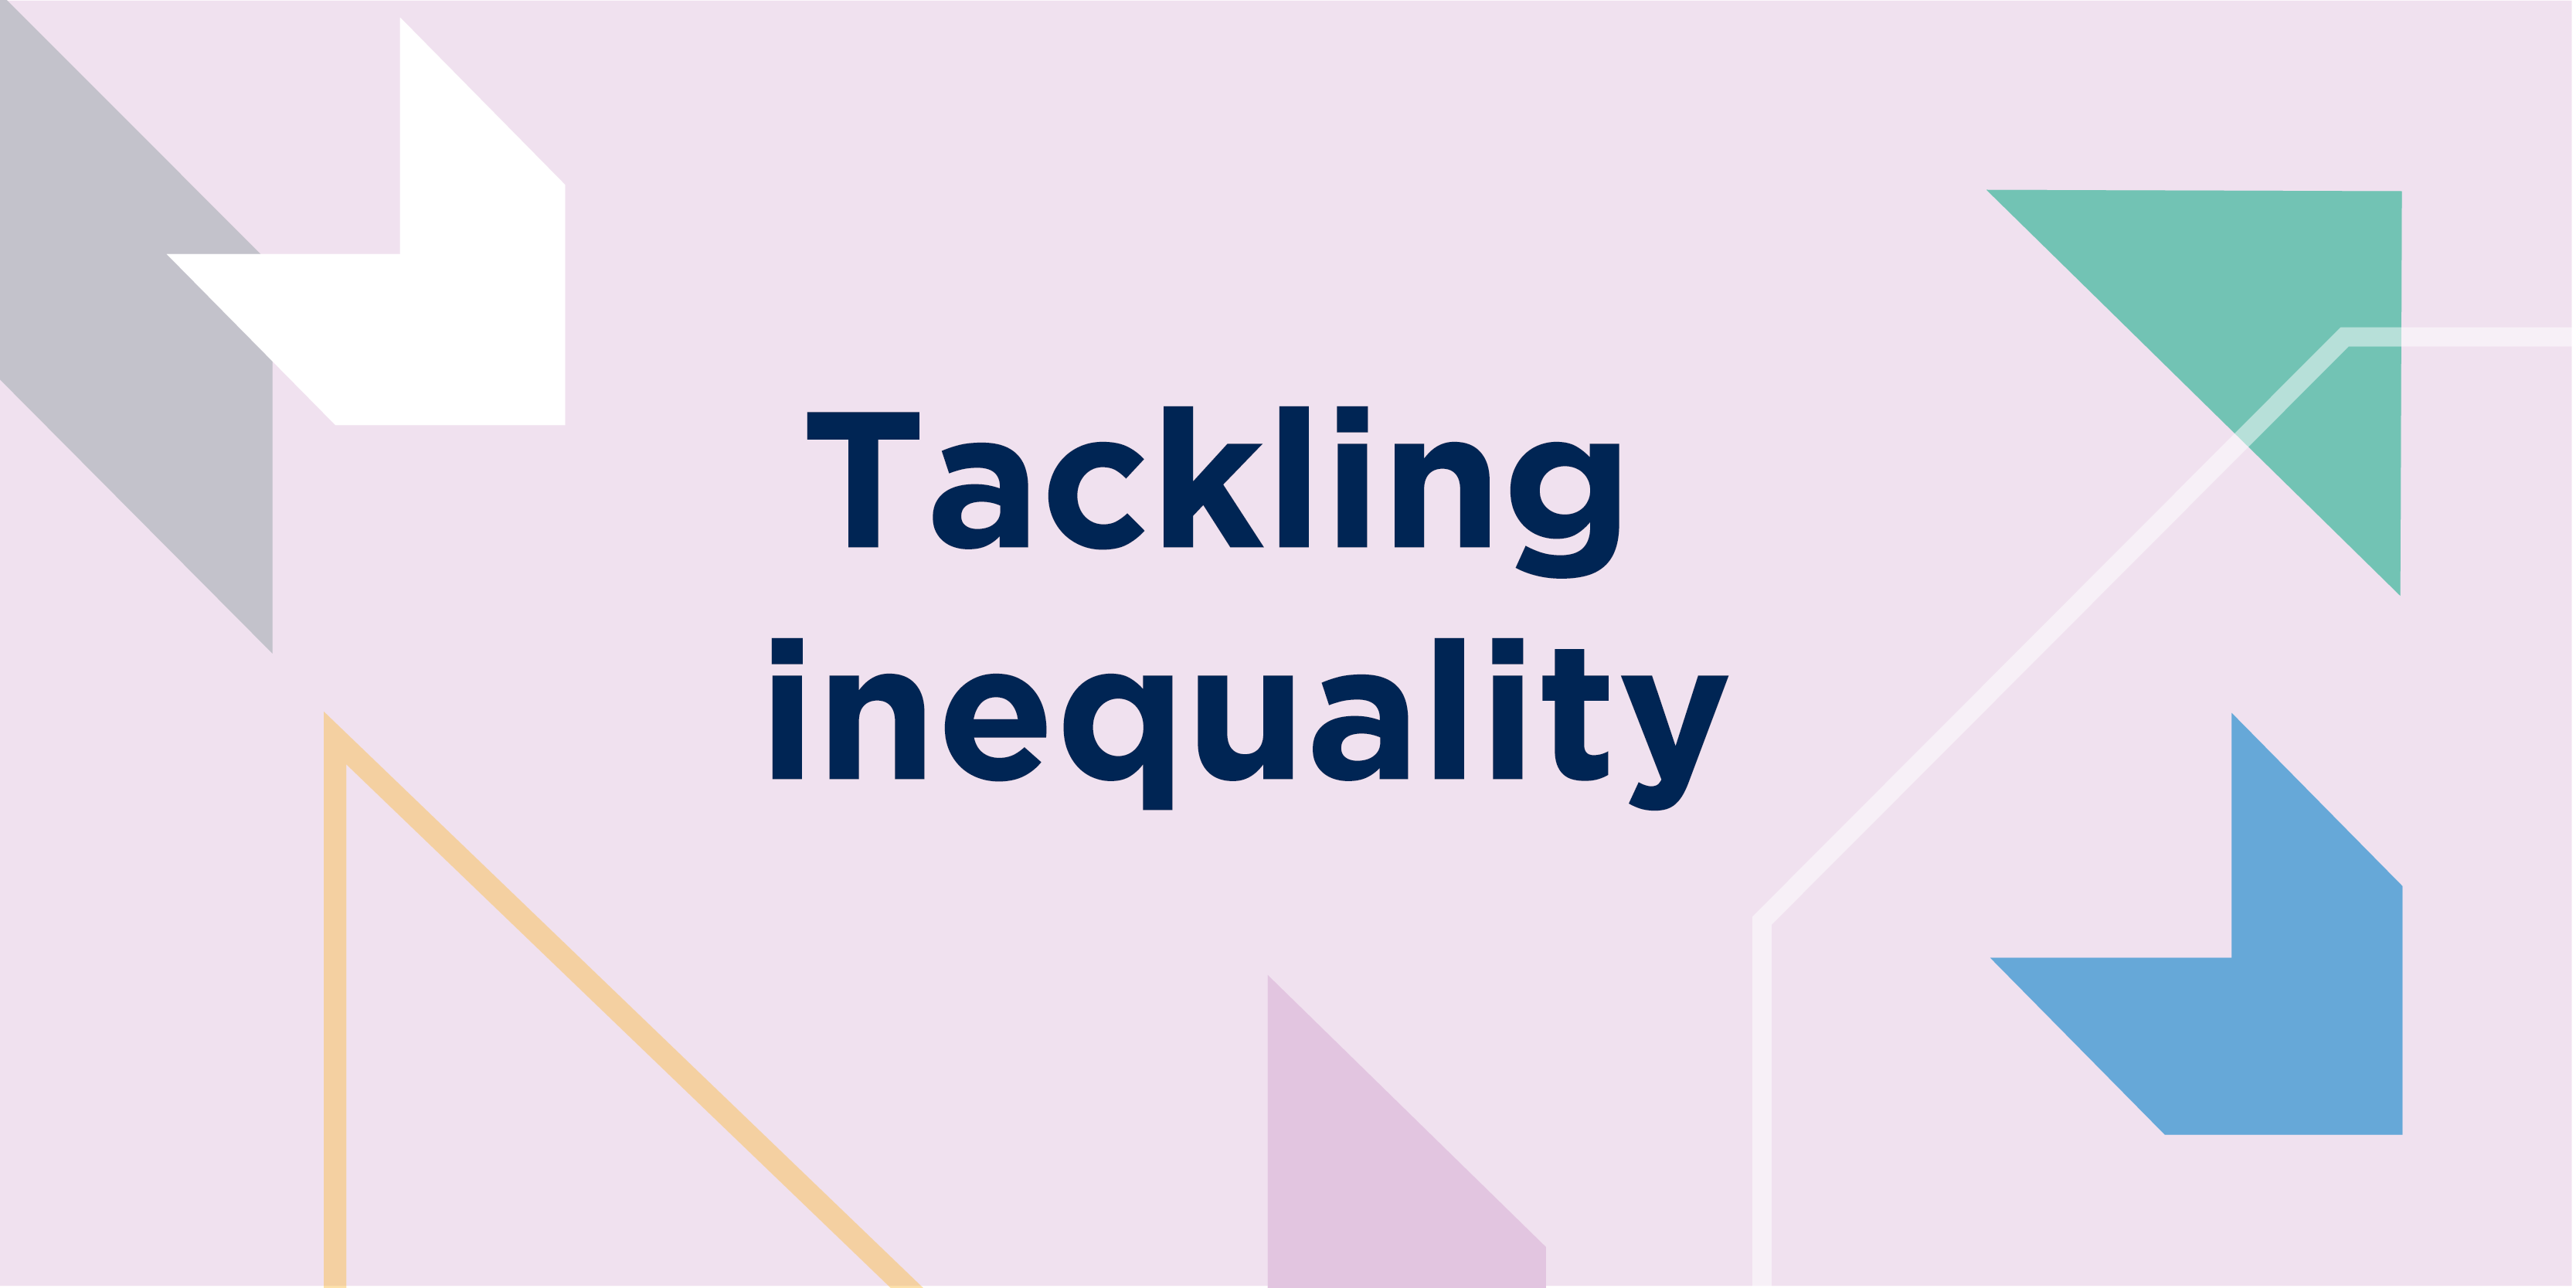 Tackling inequality